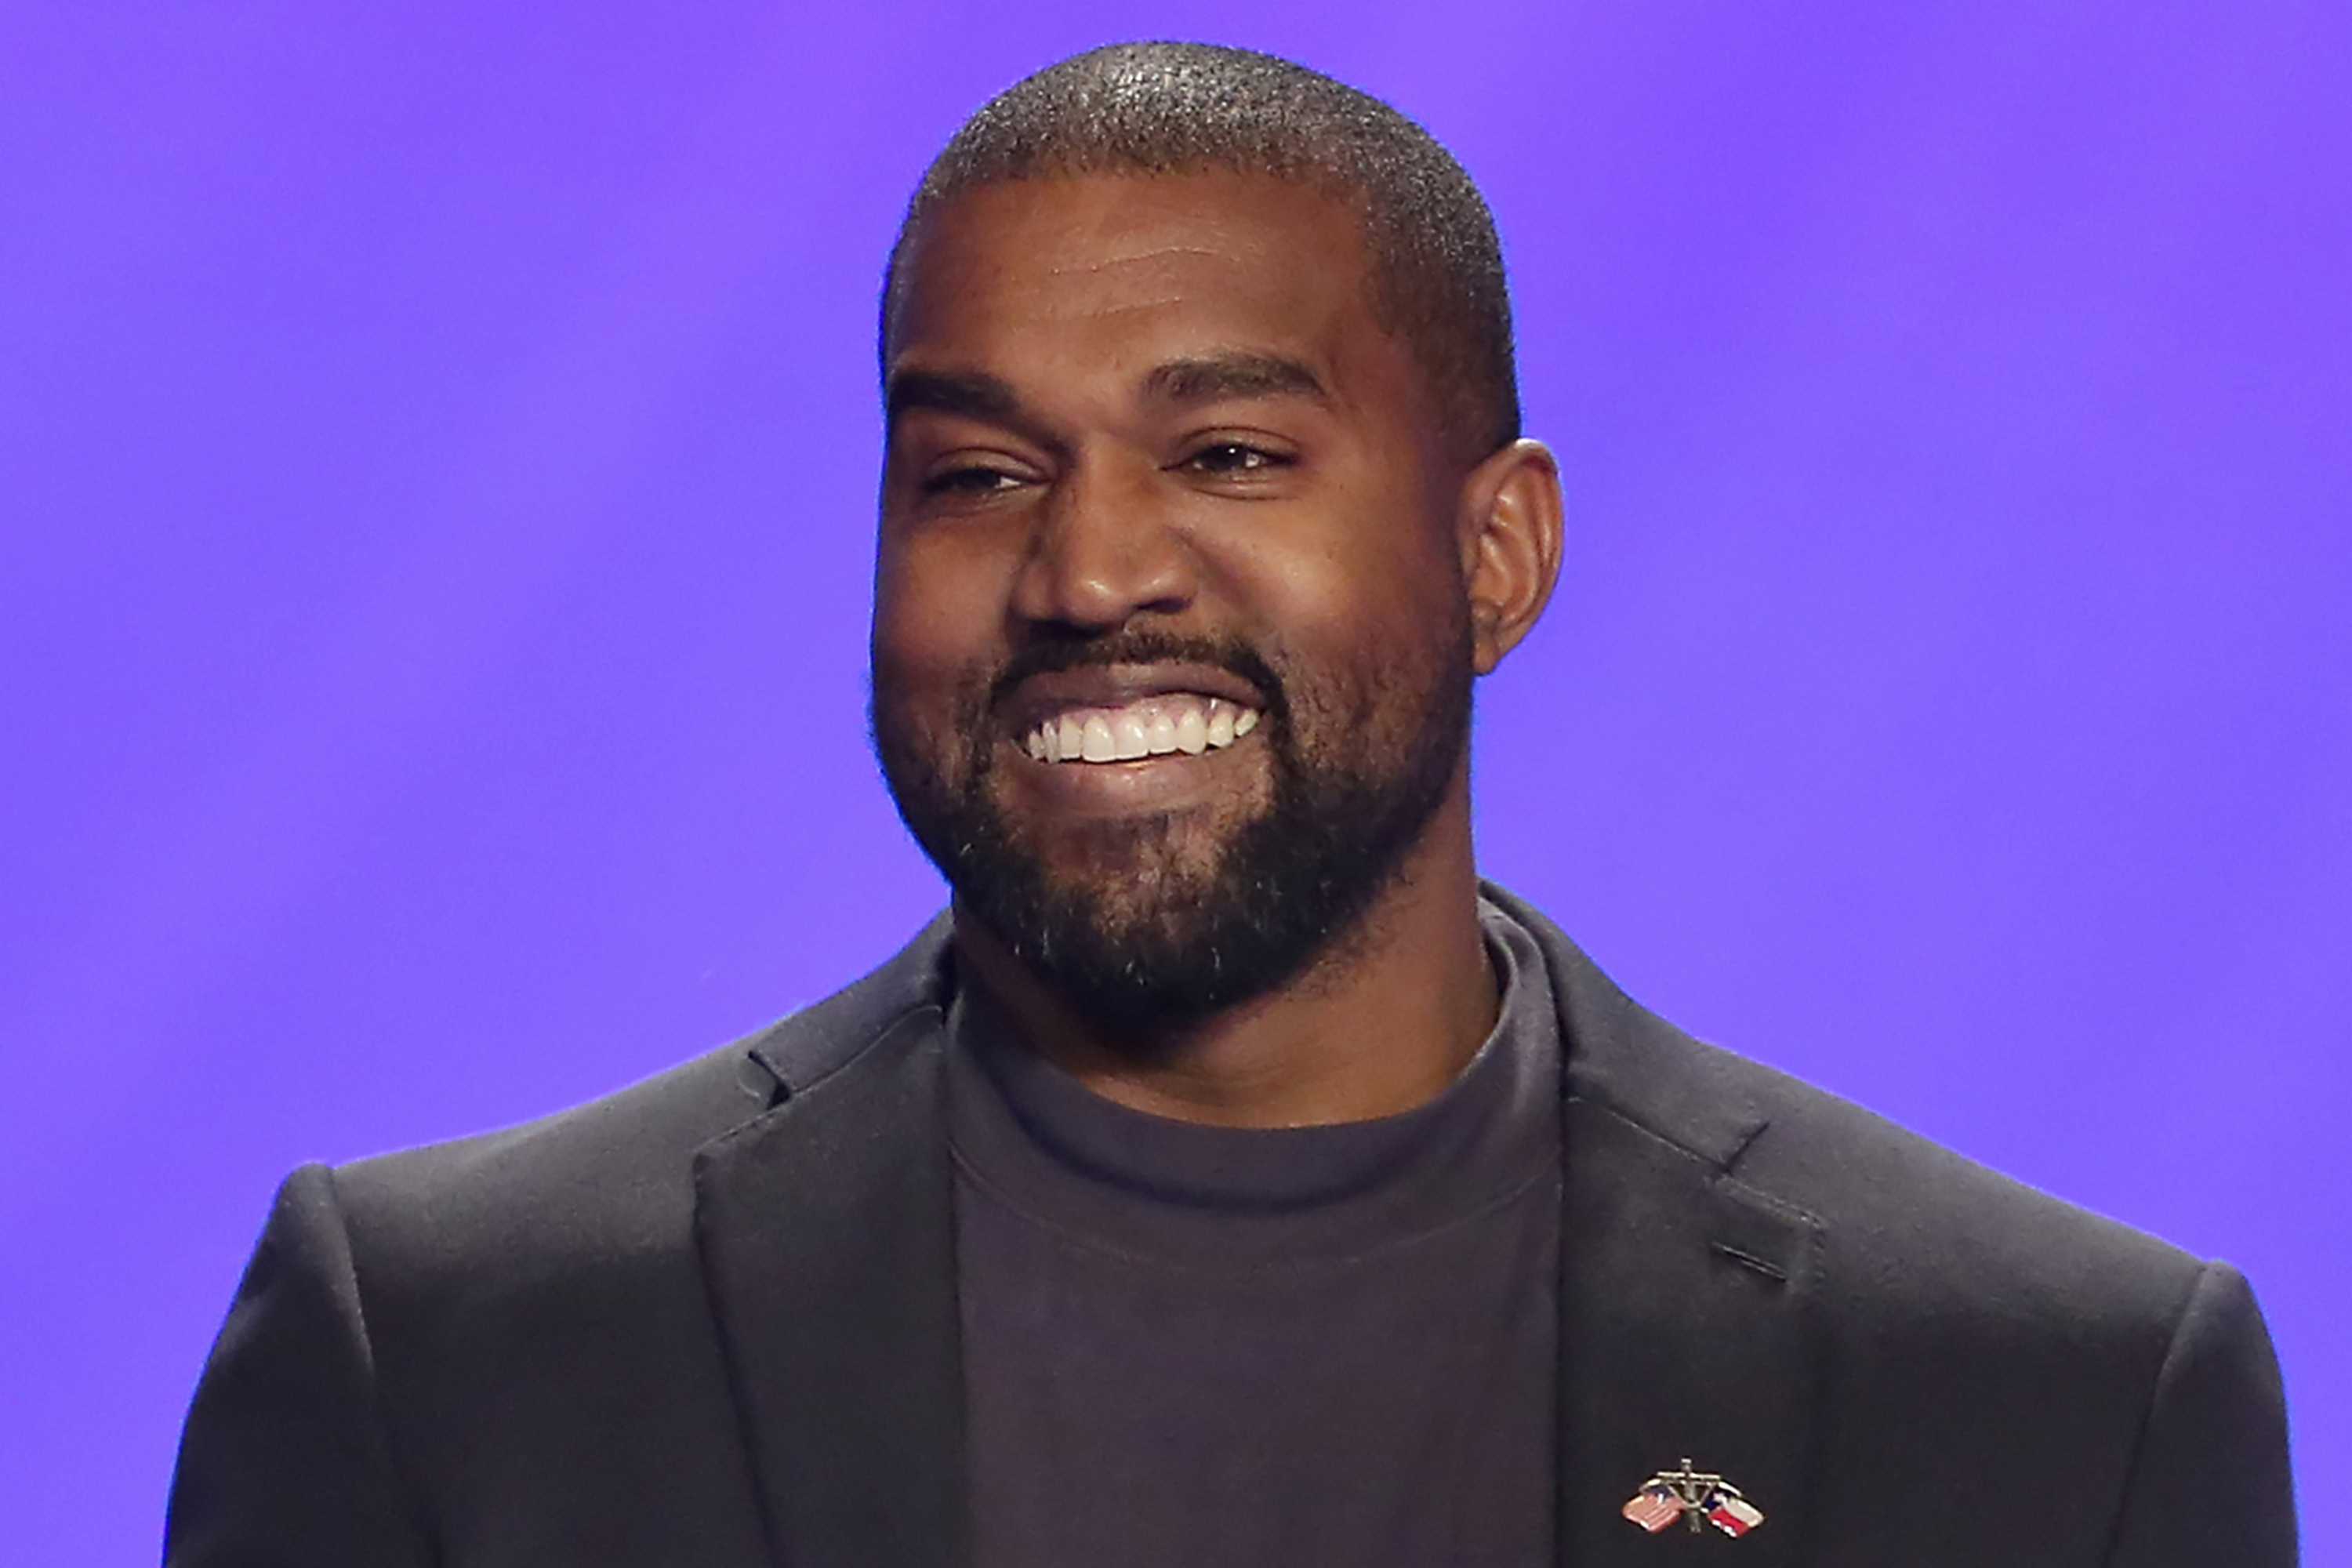 Kanye West Could Be Banned From Entering Australia Over Antisemitic Comments